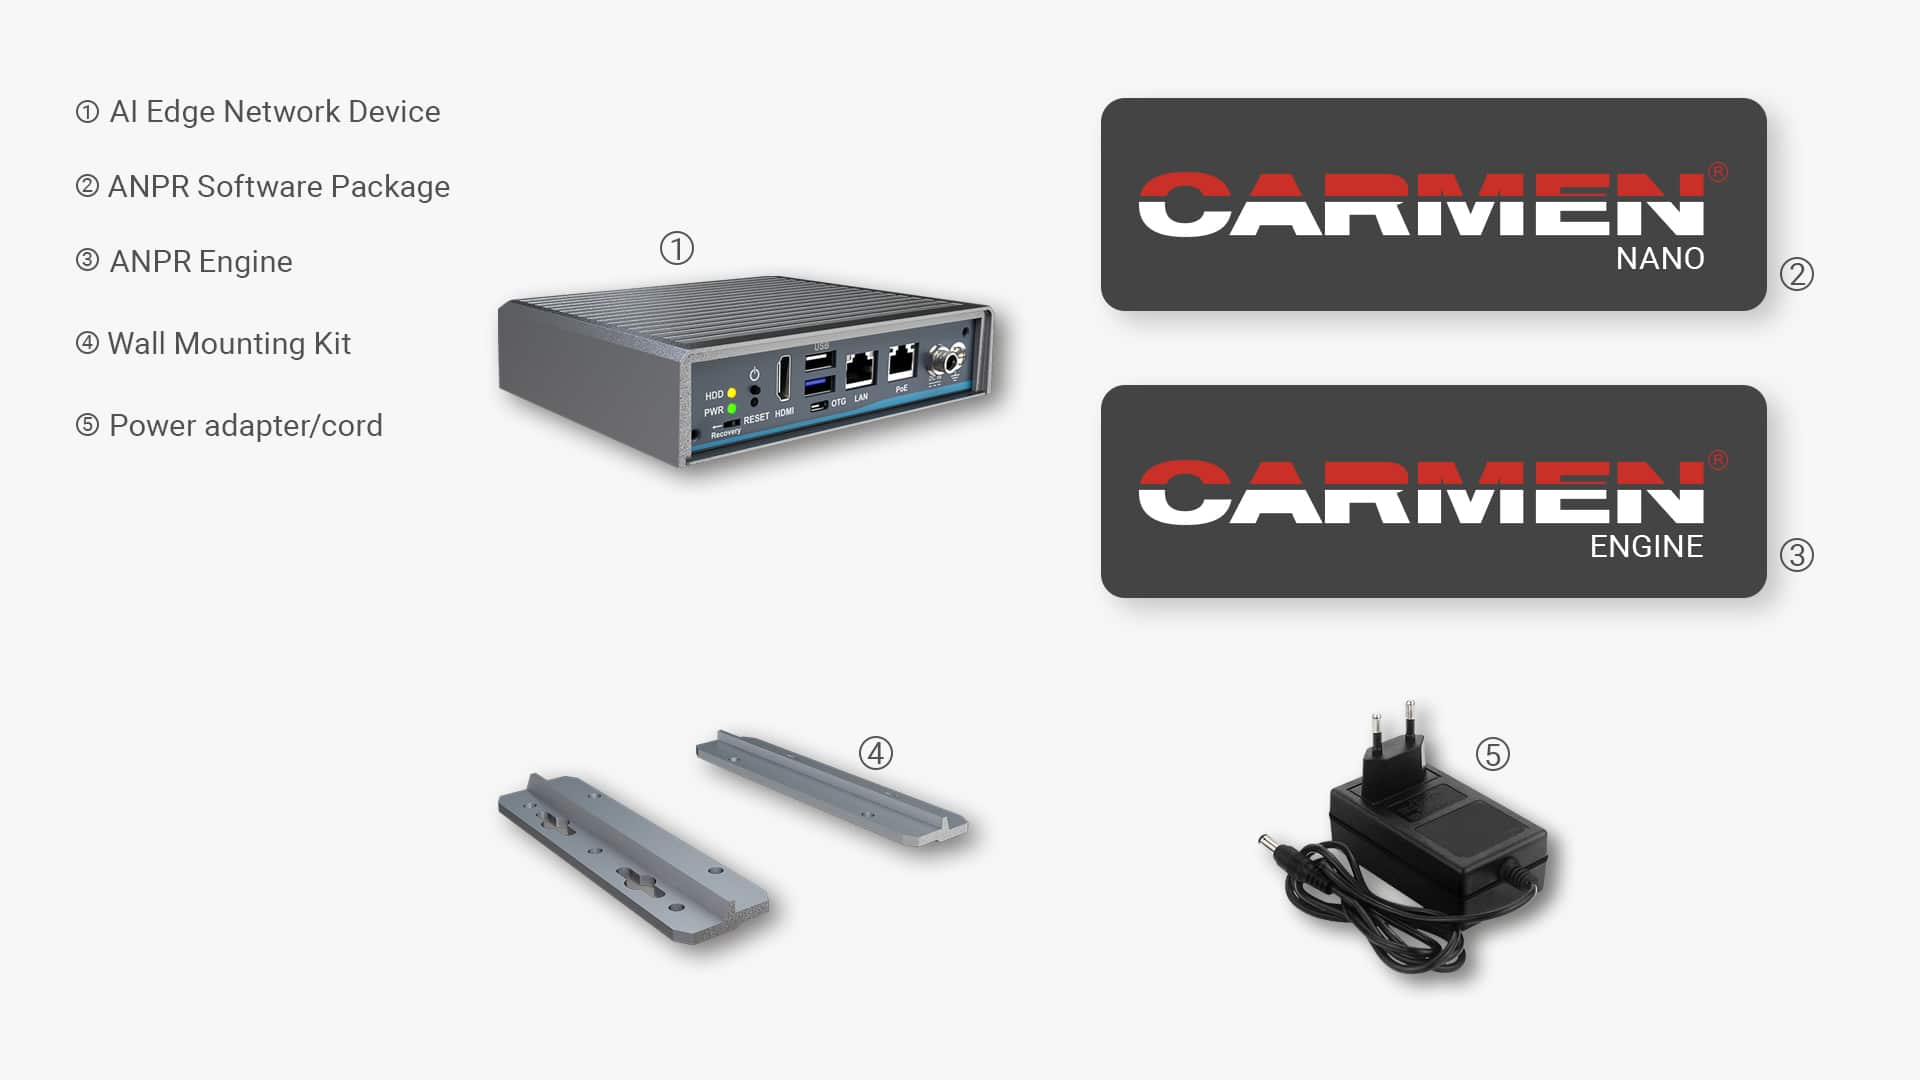 Included and optional parts of Carmen BOX anpr device